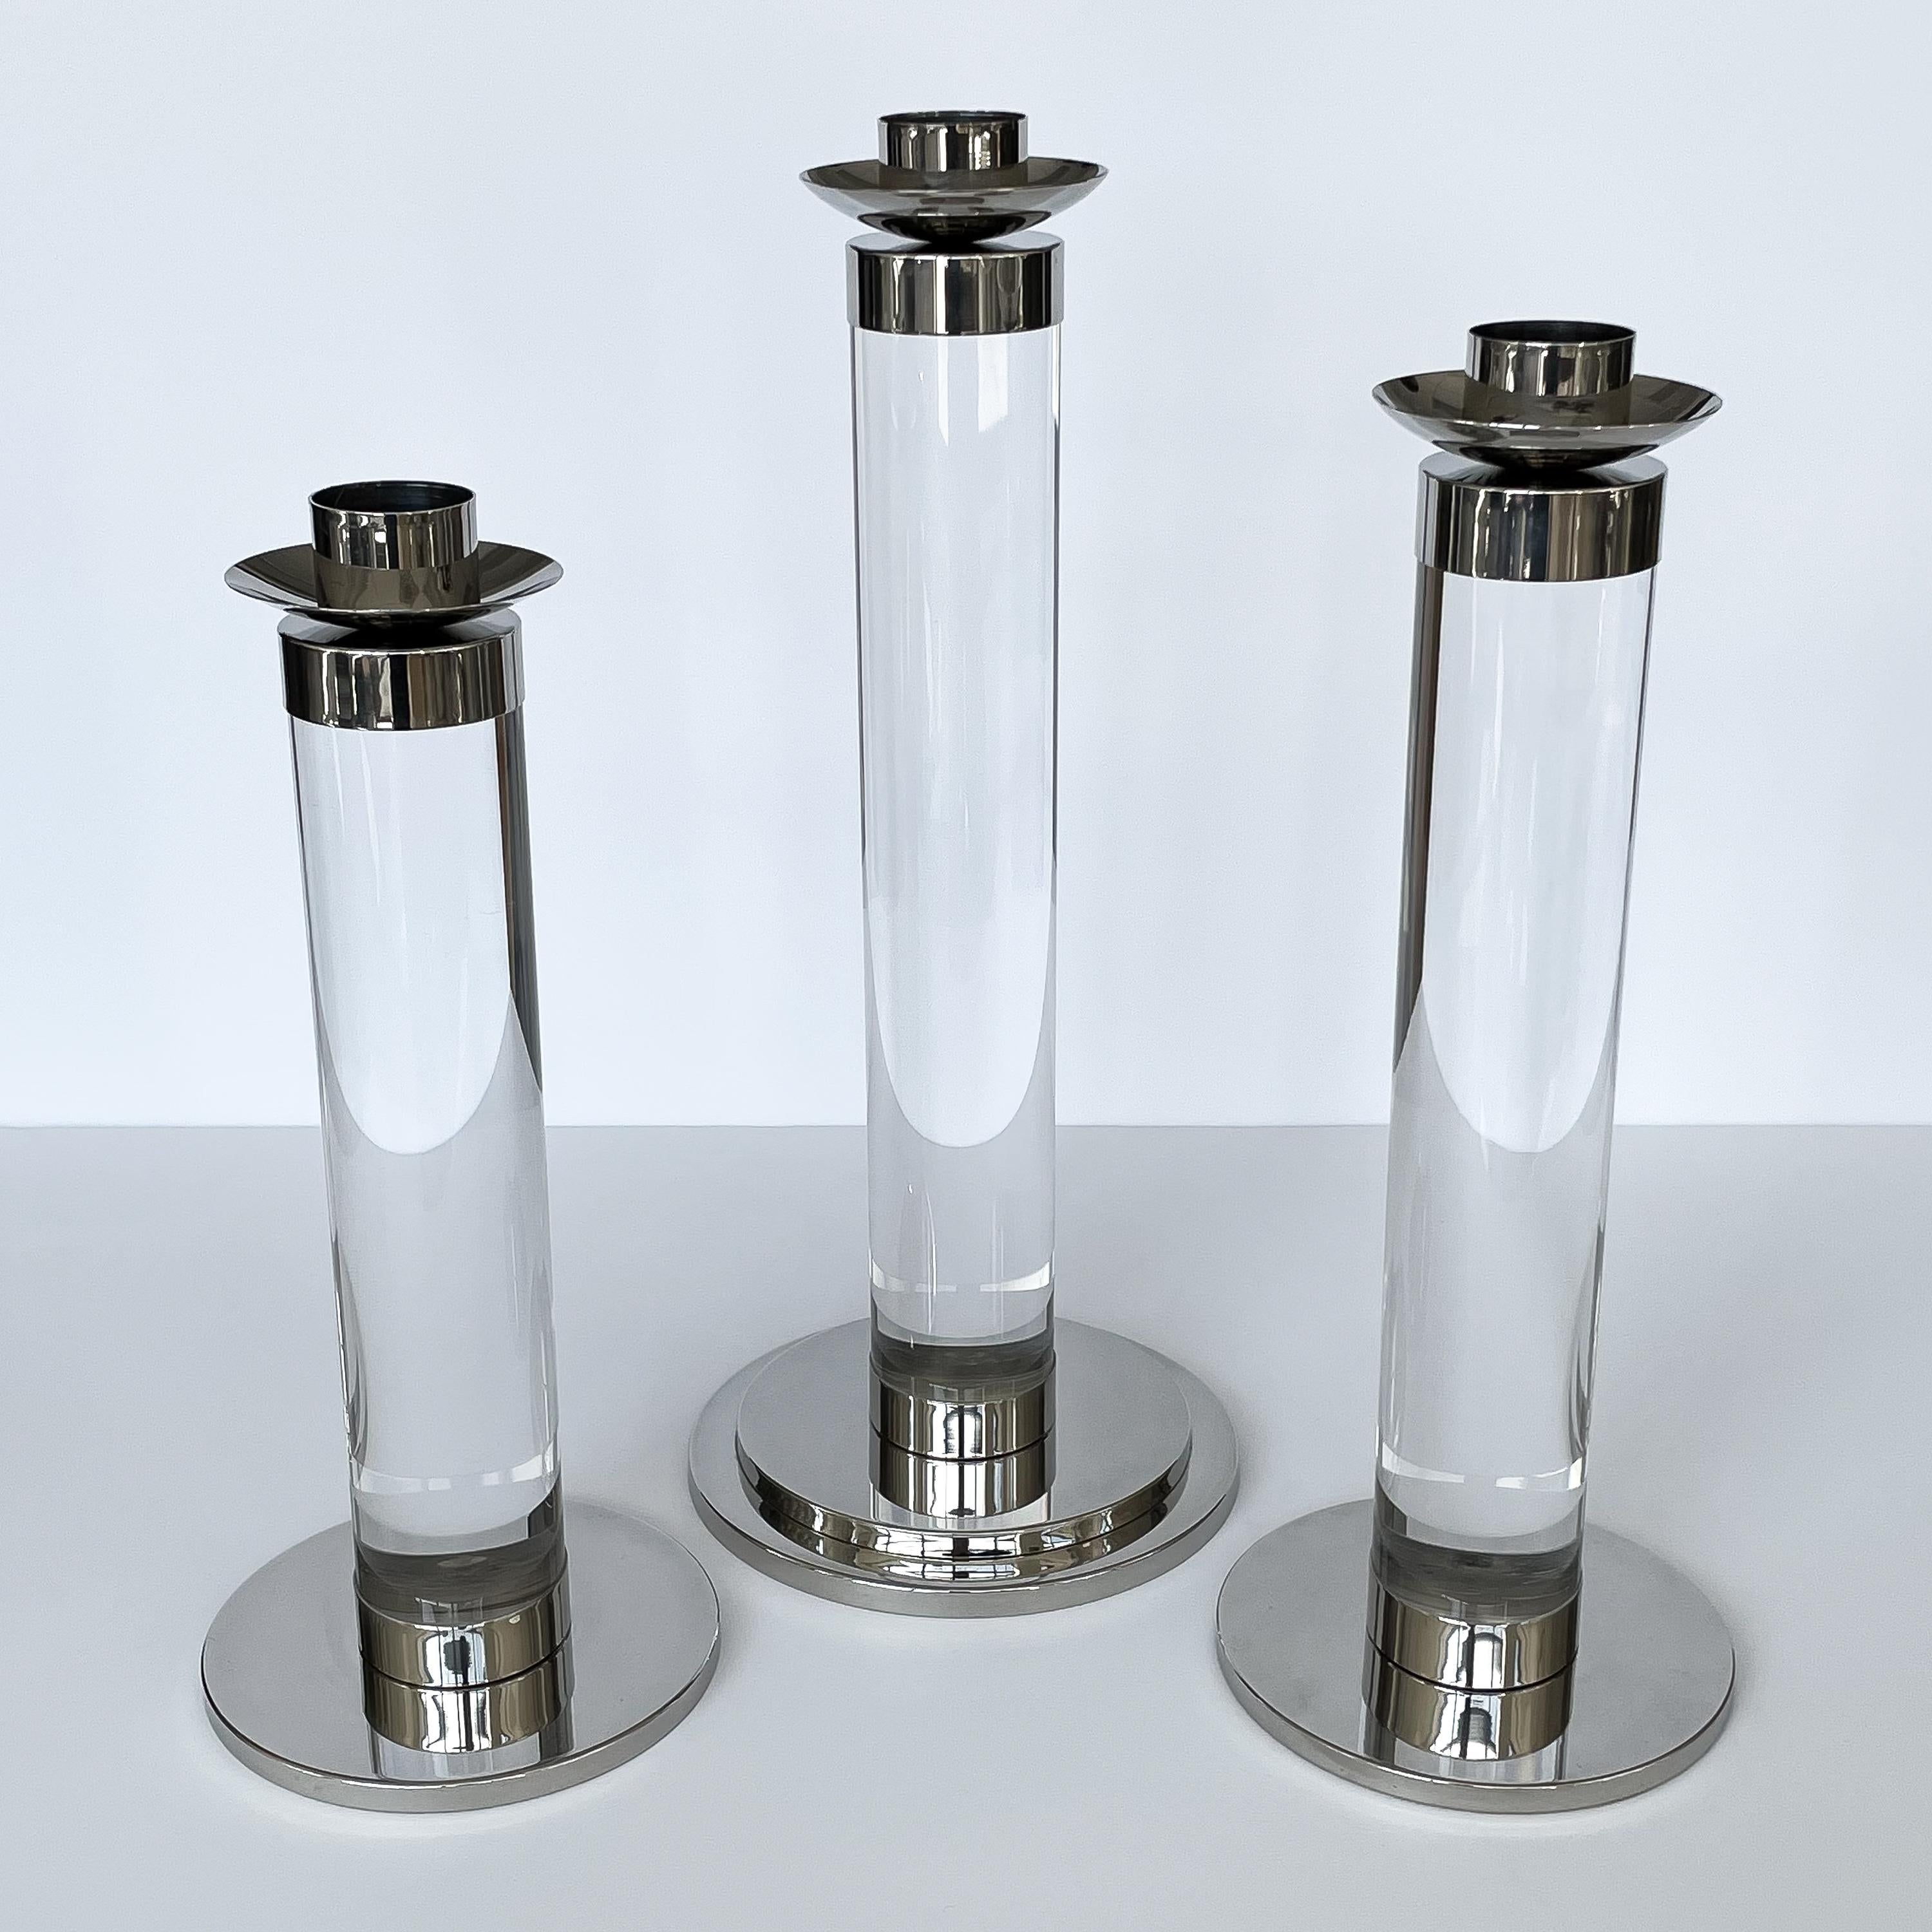 Set of three Italian large lucite and chrome candlesticks, circa 1970s. Three candlesticks in graduating heights: 18.5